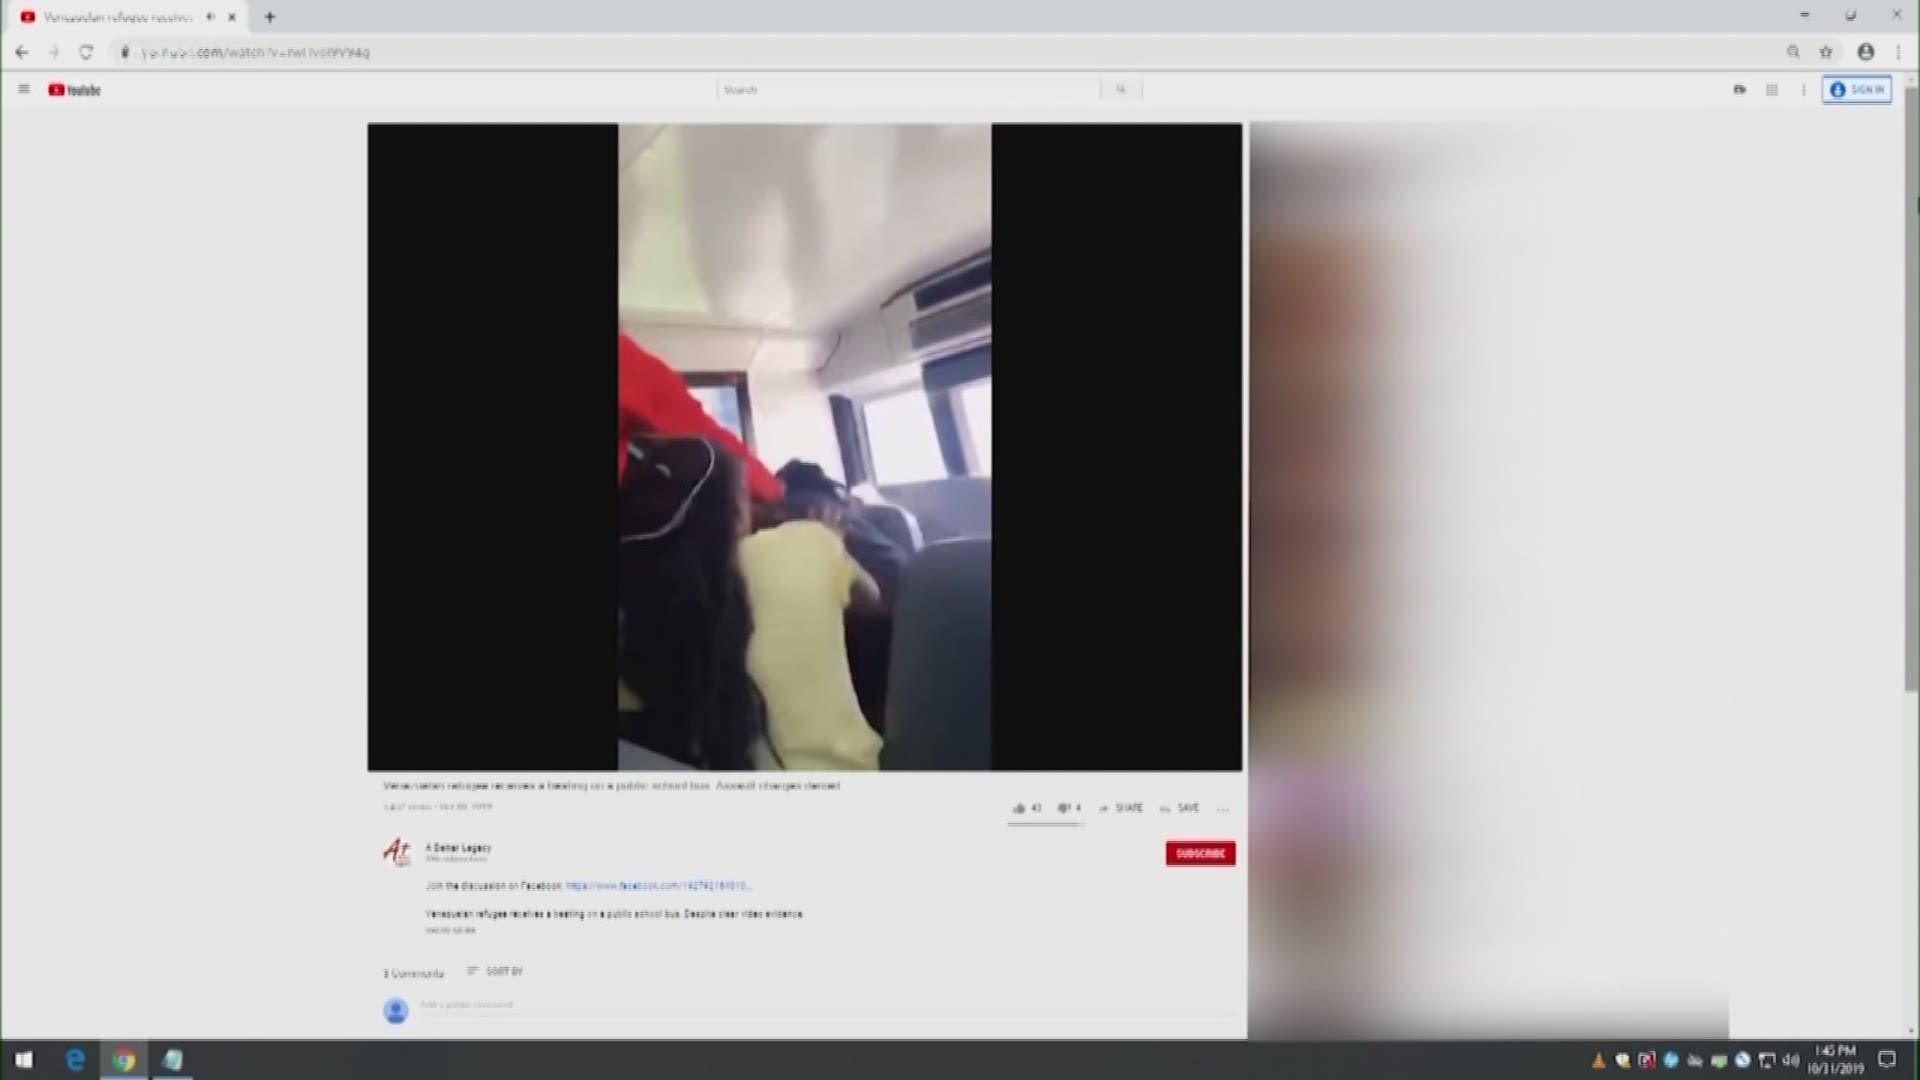 A disturbing video has surfaced of a Katy ISD student being attacked on a school bus. The student’s mom said it is bullying and assault, and now she wants answers.